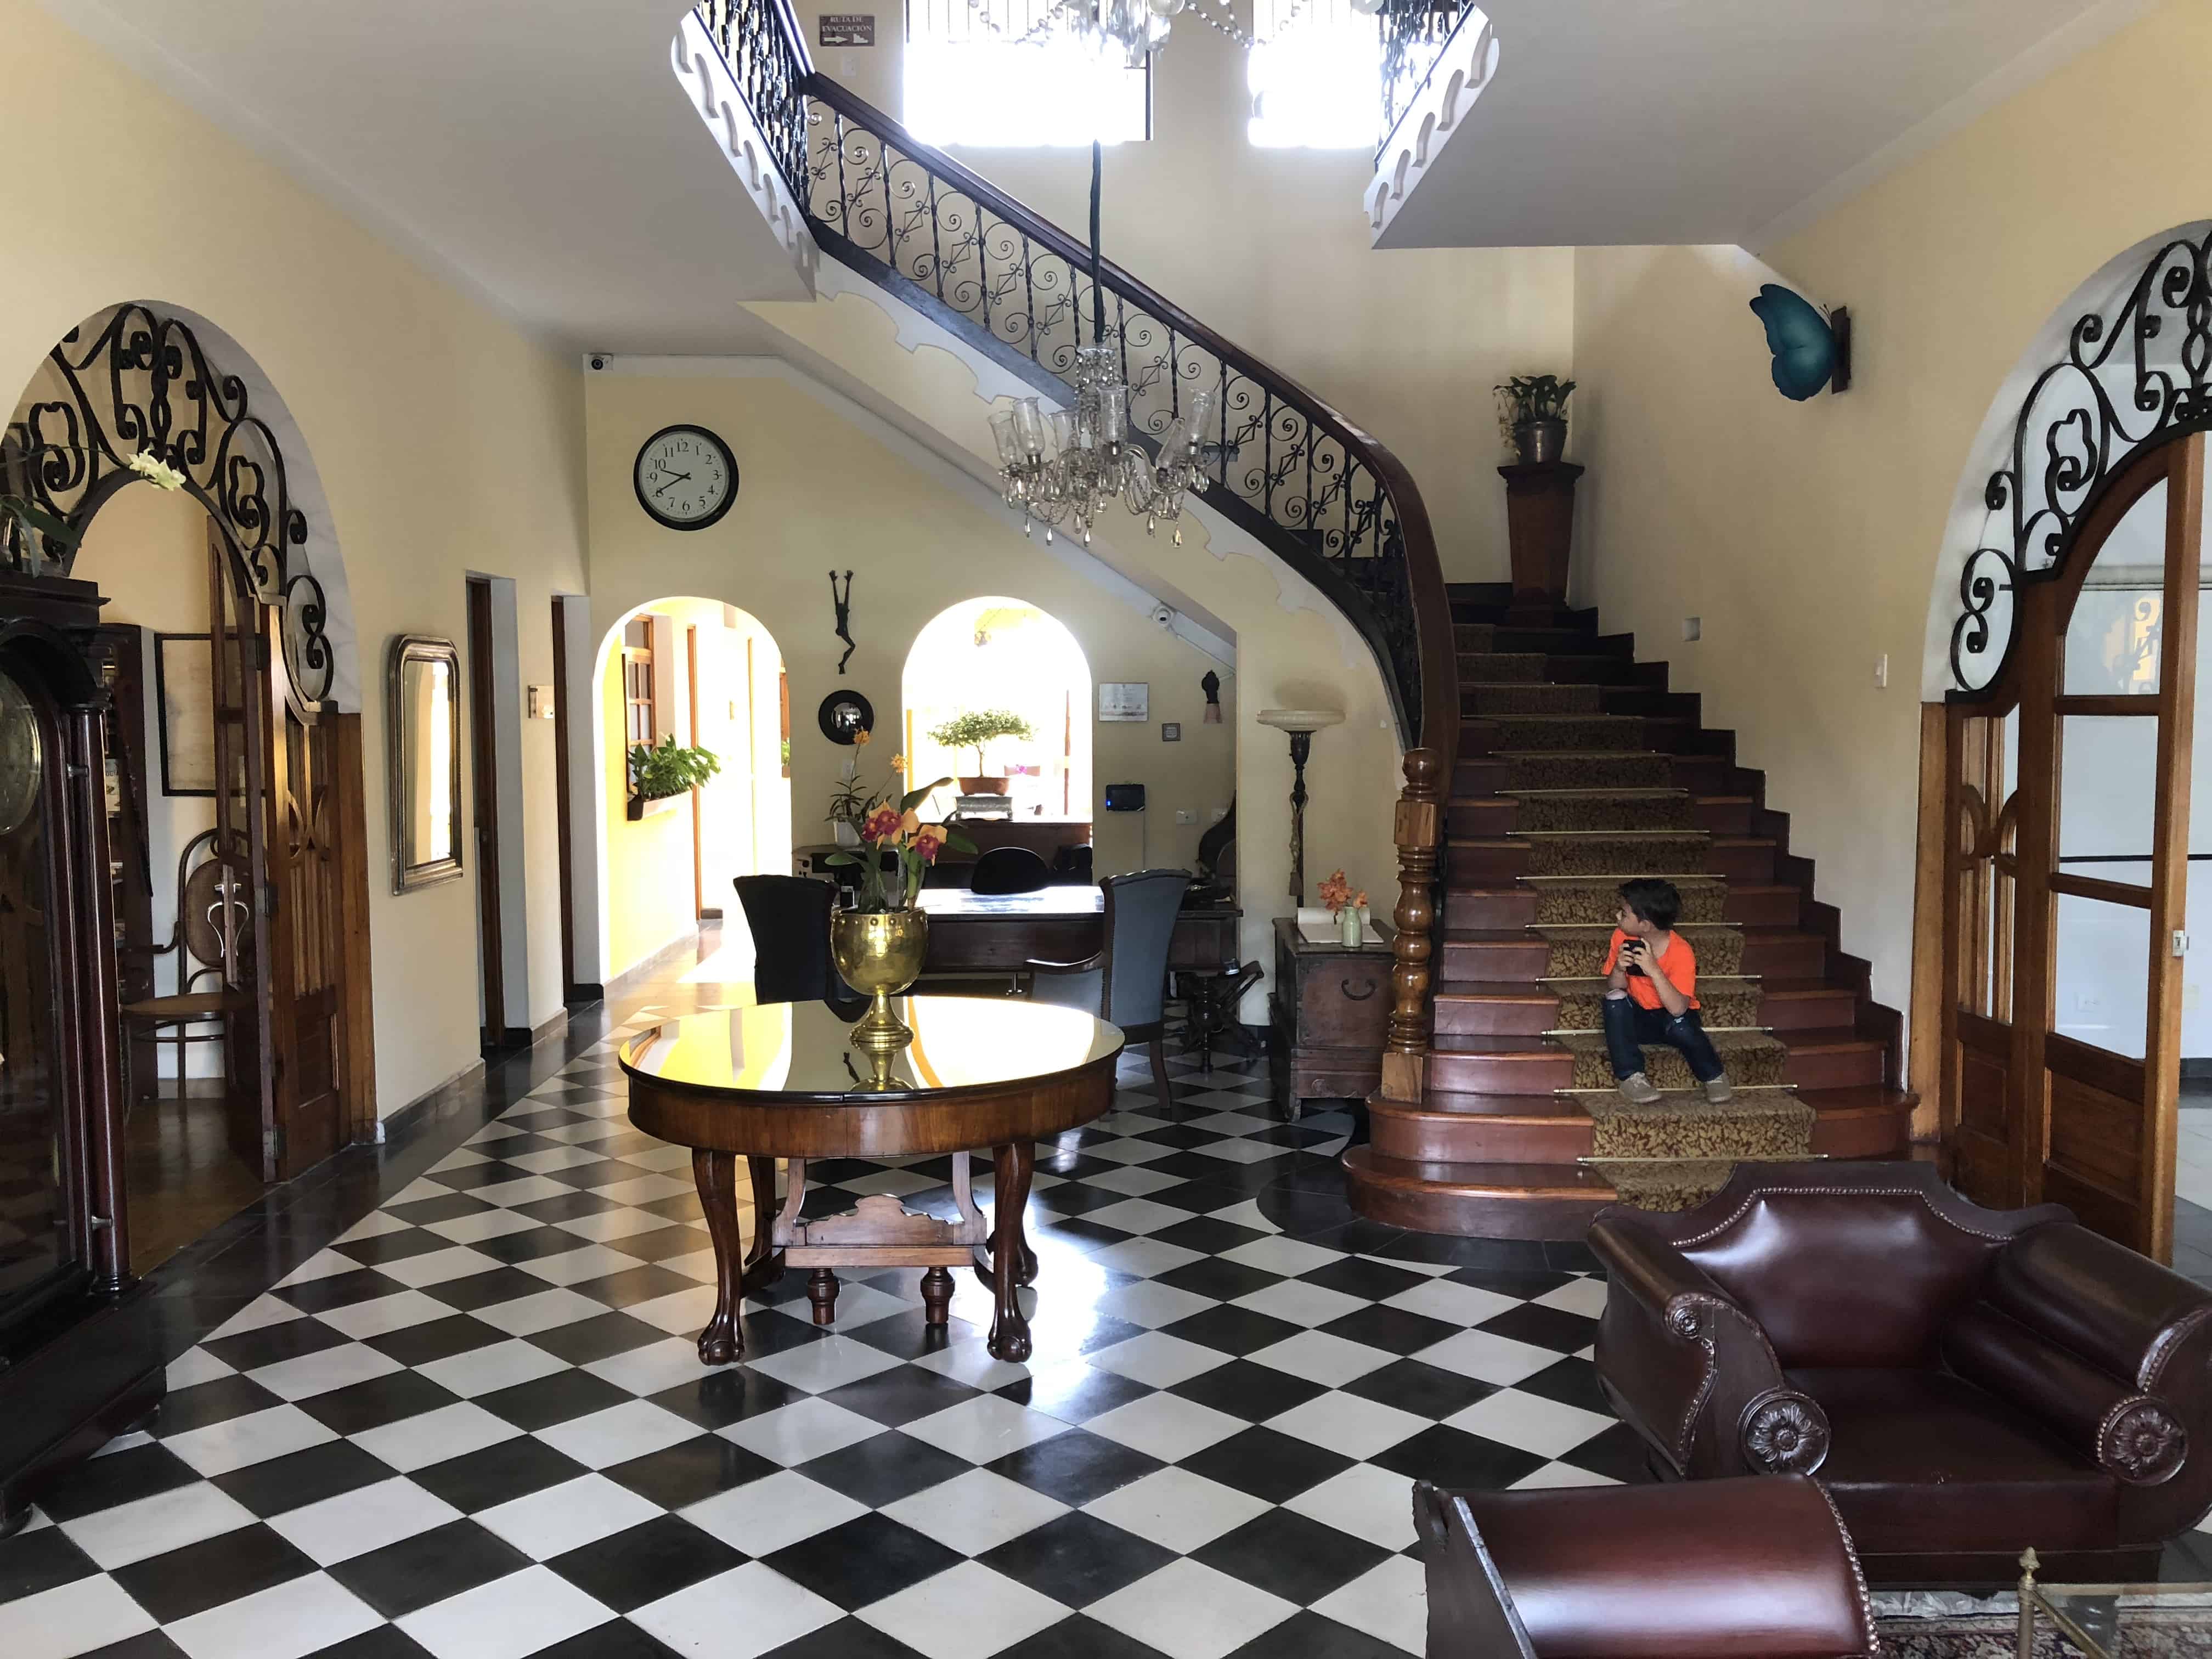 Lobby of Hotel Boutique Don Alfonso in Pereira, Risaralda, Colombia